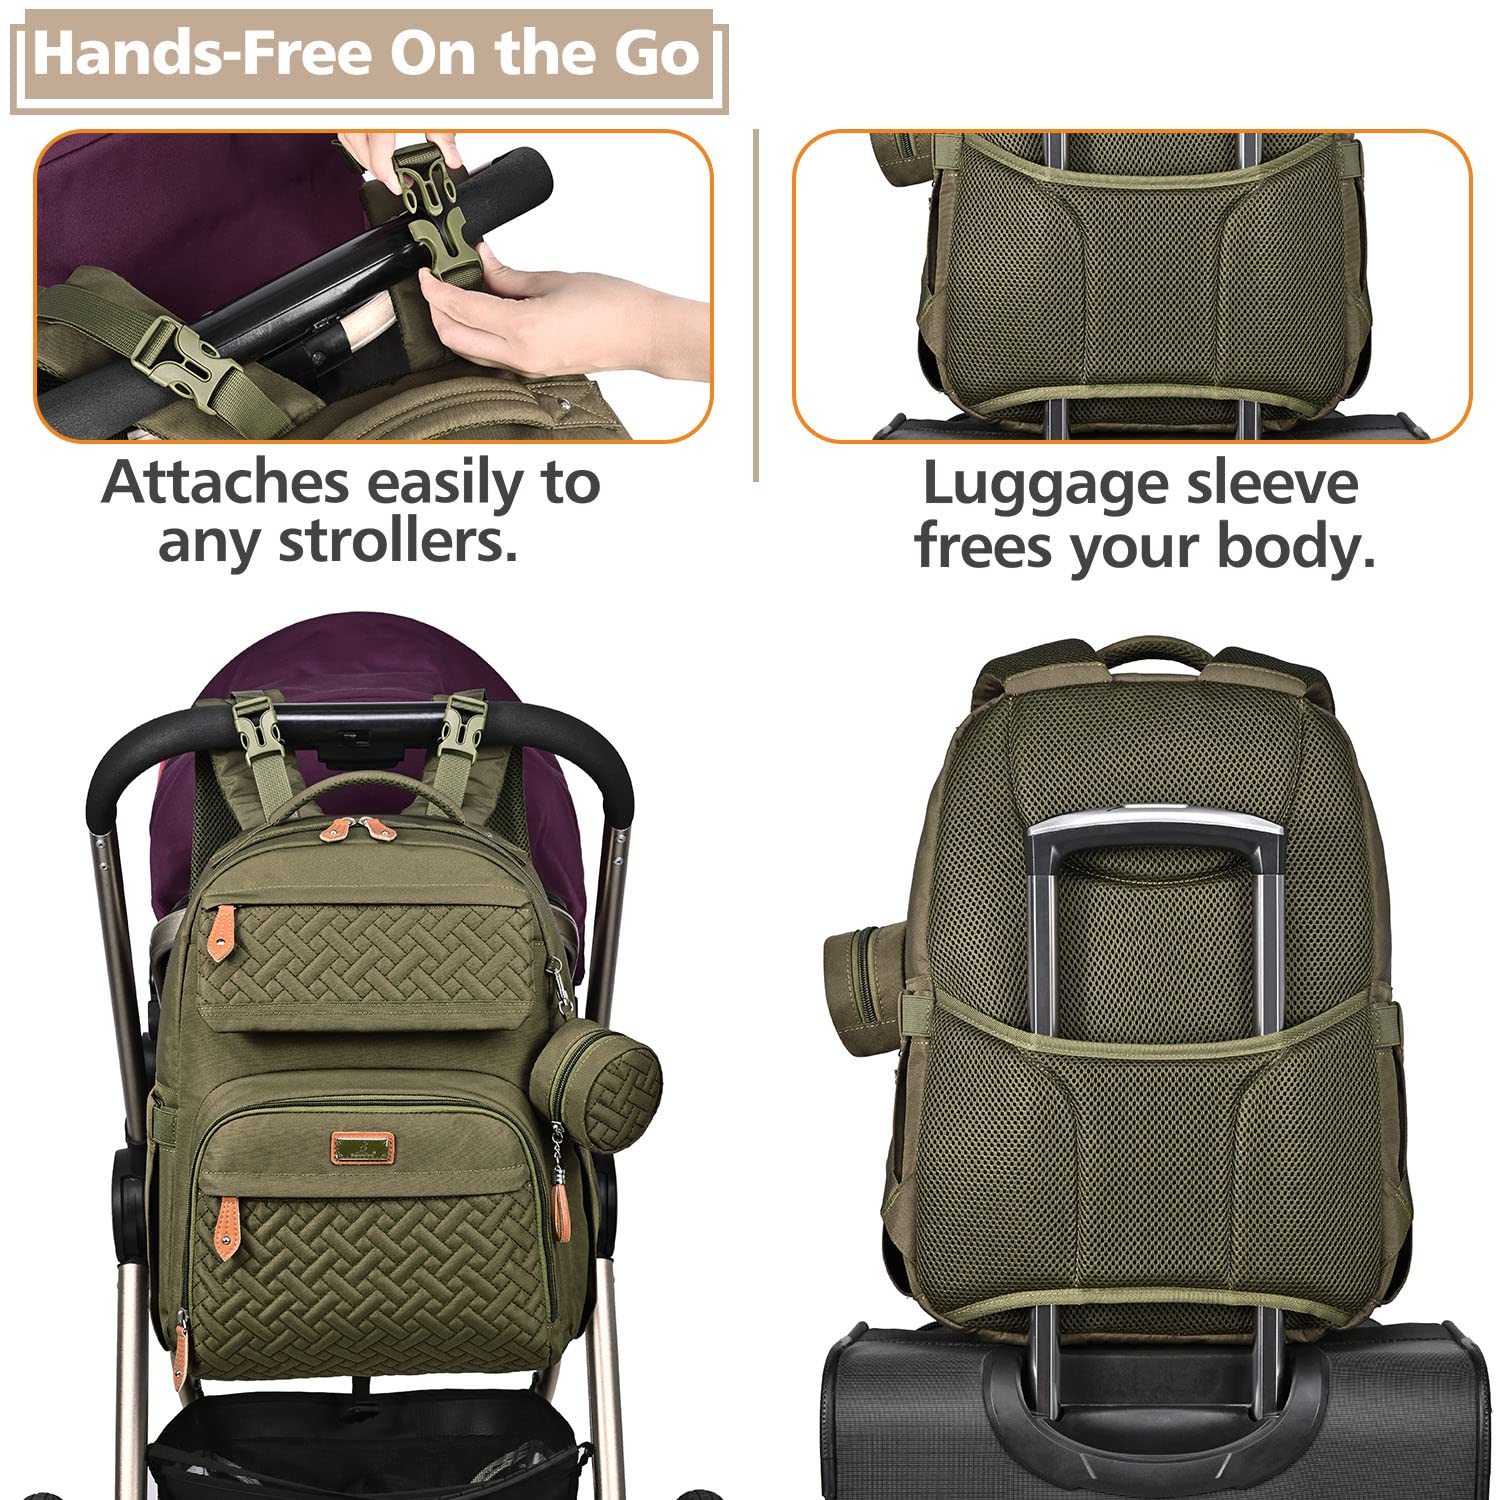 BabbleRoo Diaper Bag Backpack, Unisex Bags with Changing Pad, Pacifier Case & Stroller Straps, Multifunction Waterproof Travel Back Pack for Boys Girls, Army Green